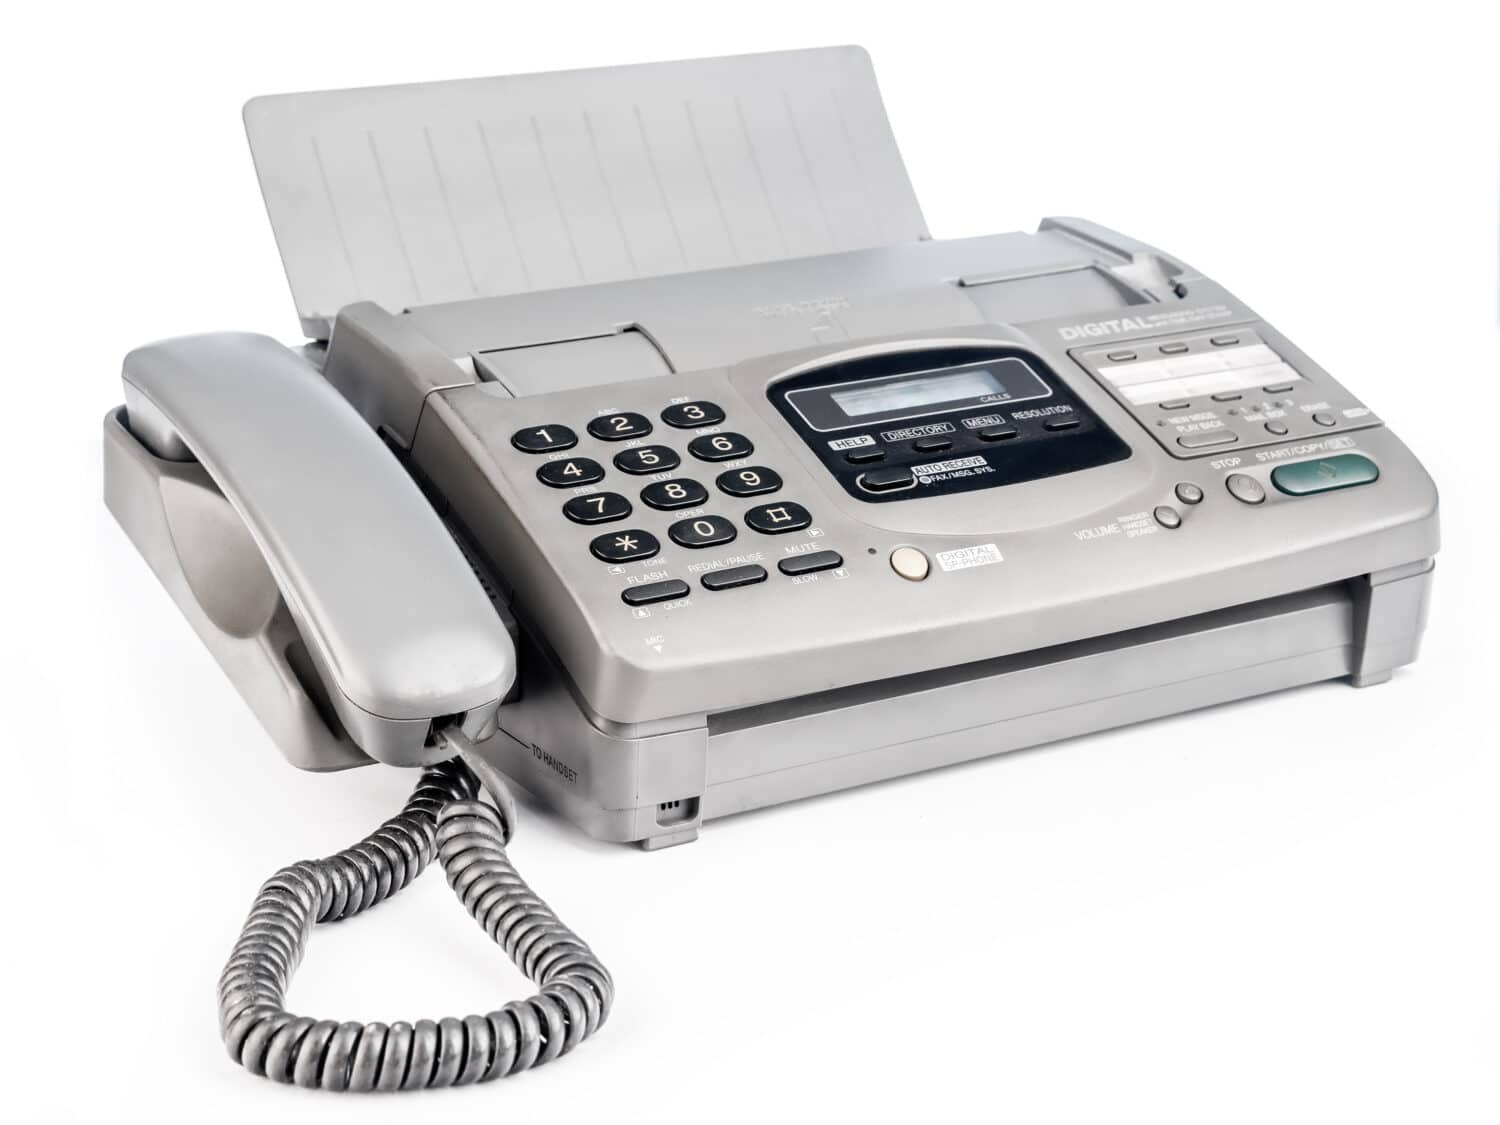 Old office fax machine shot on white background